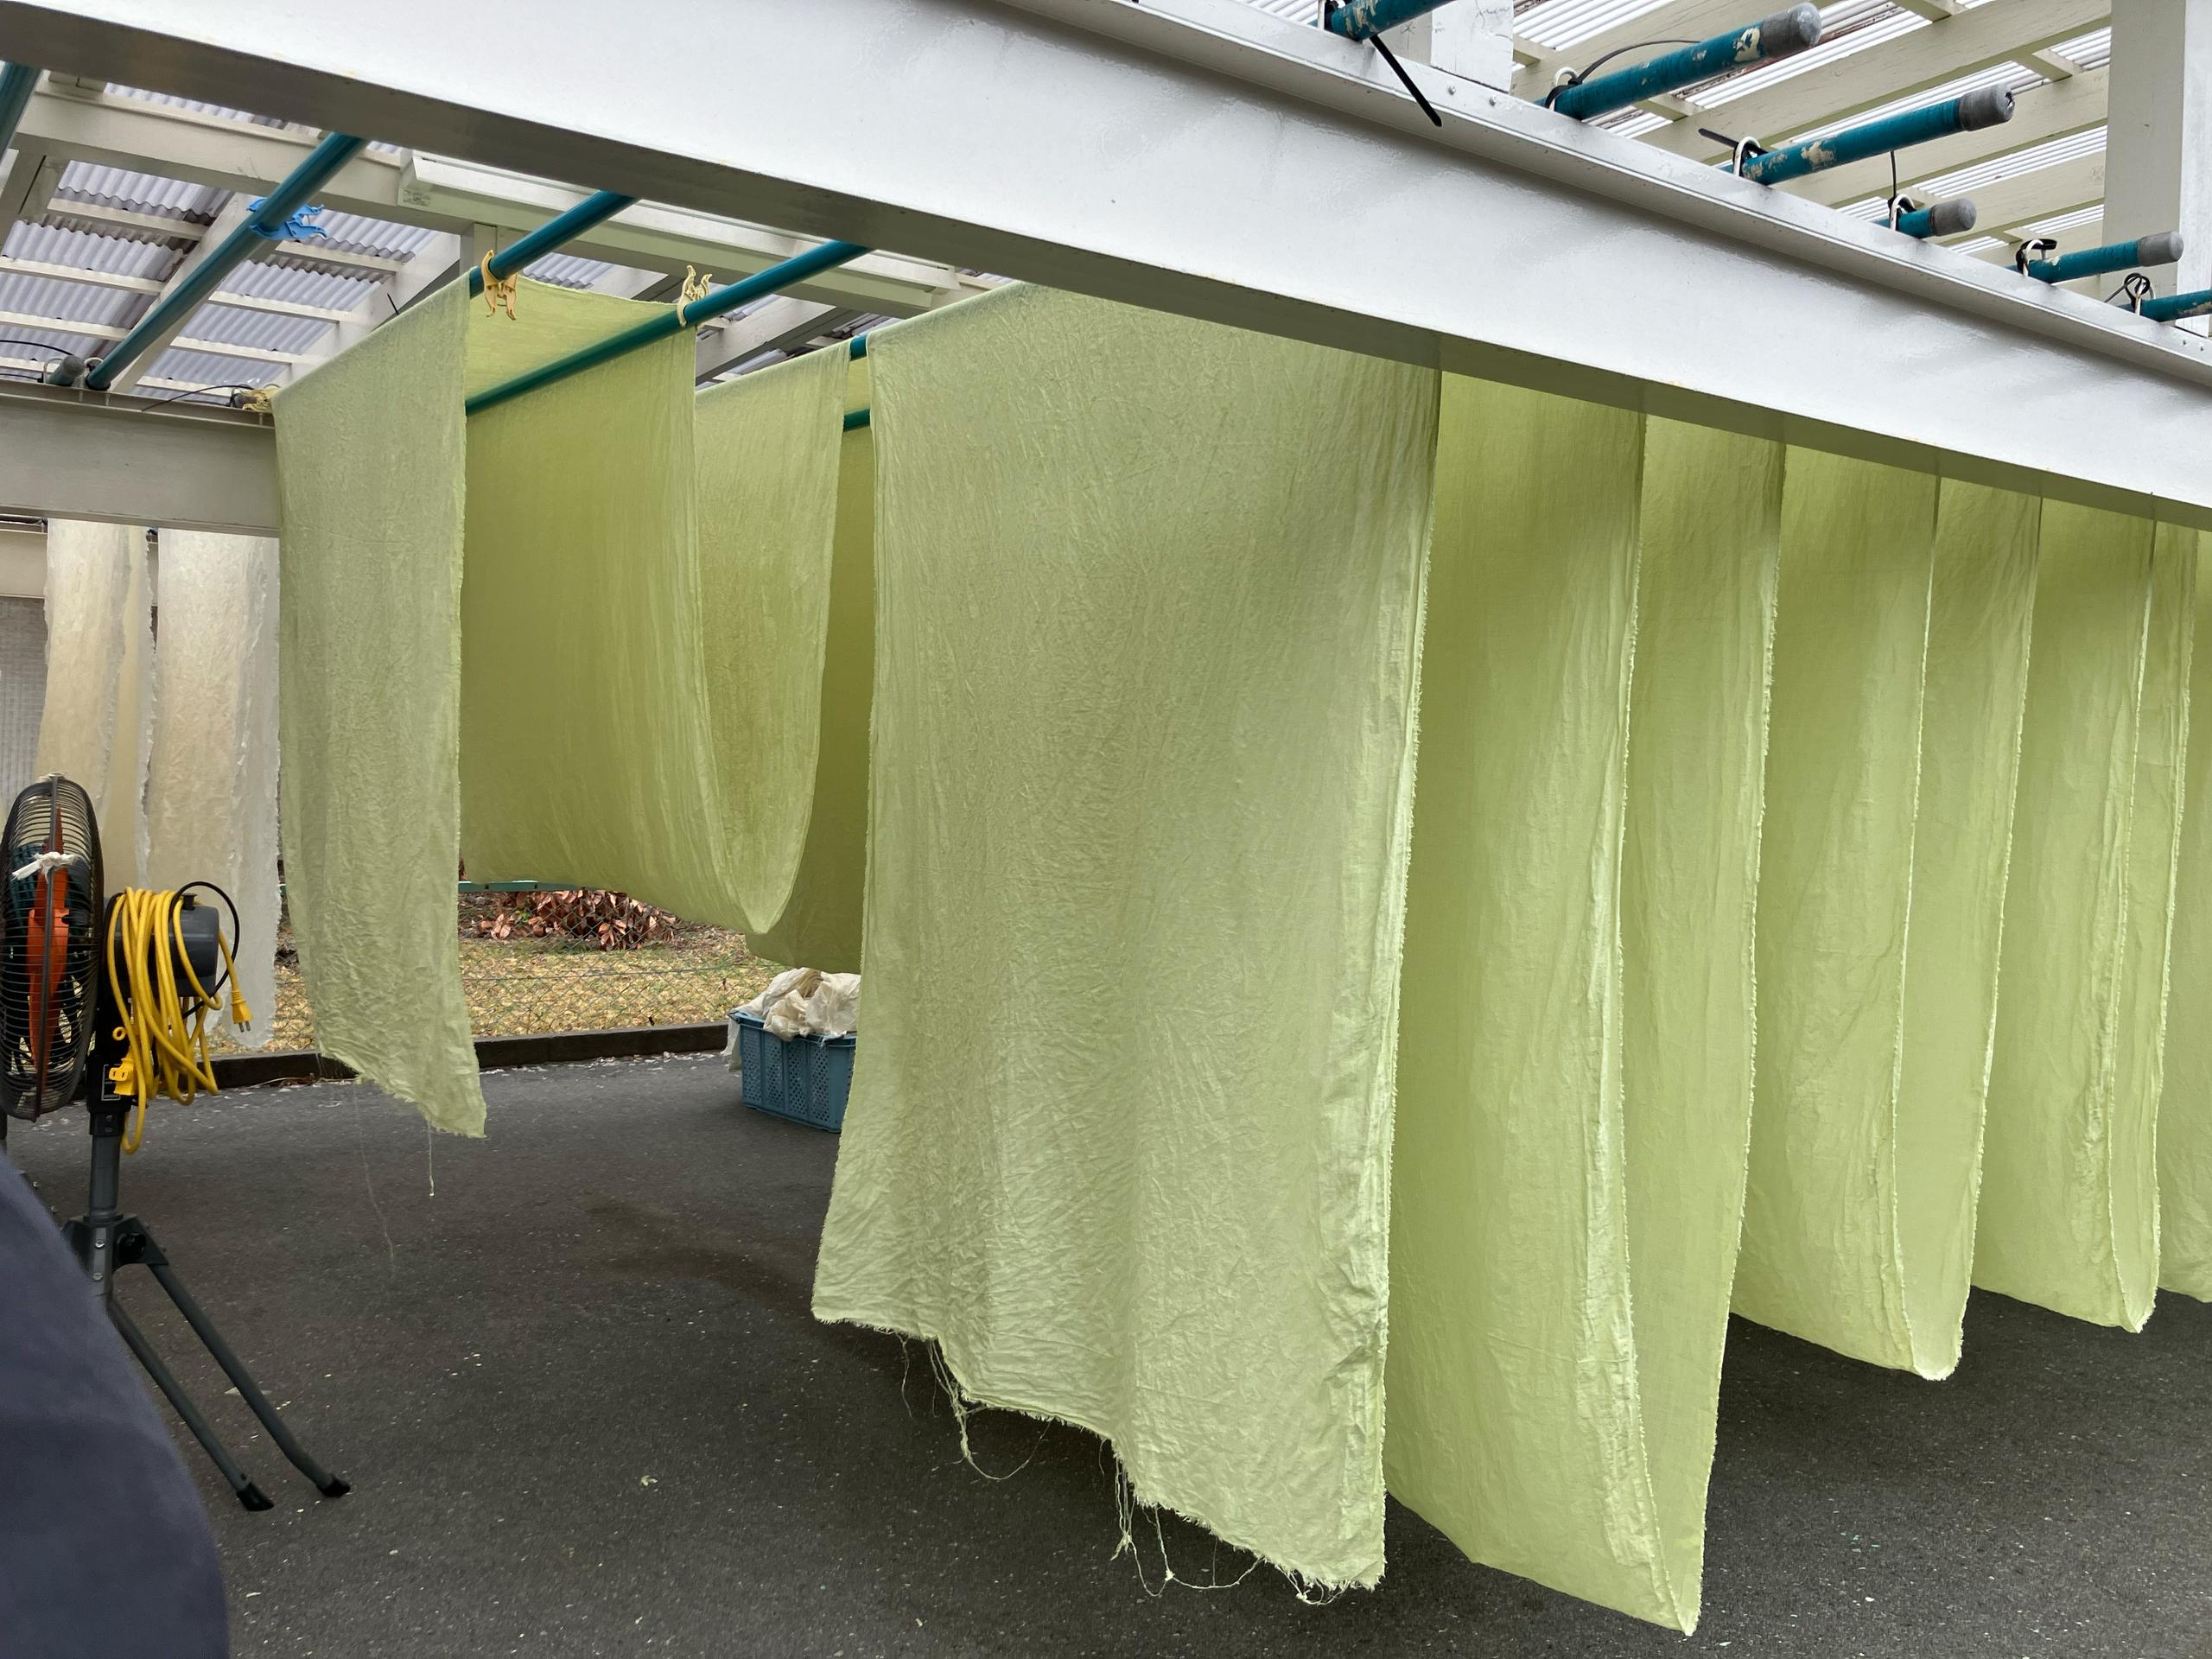 Hand dyed fabric line drying in Japan